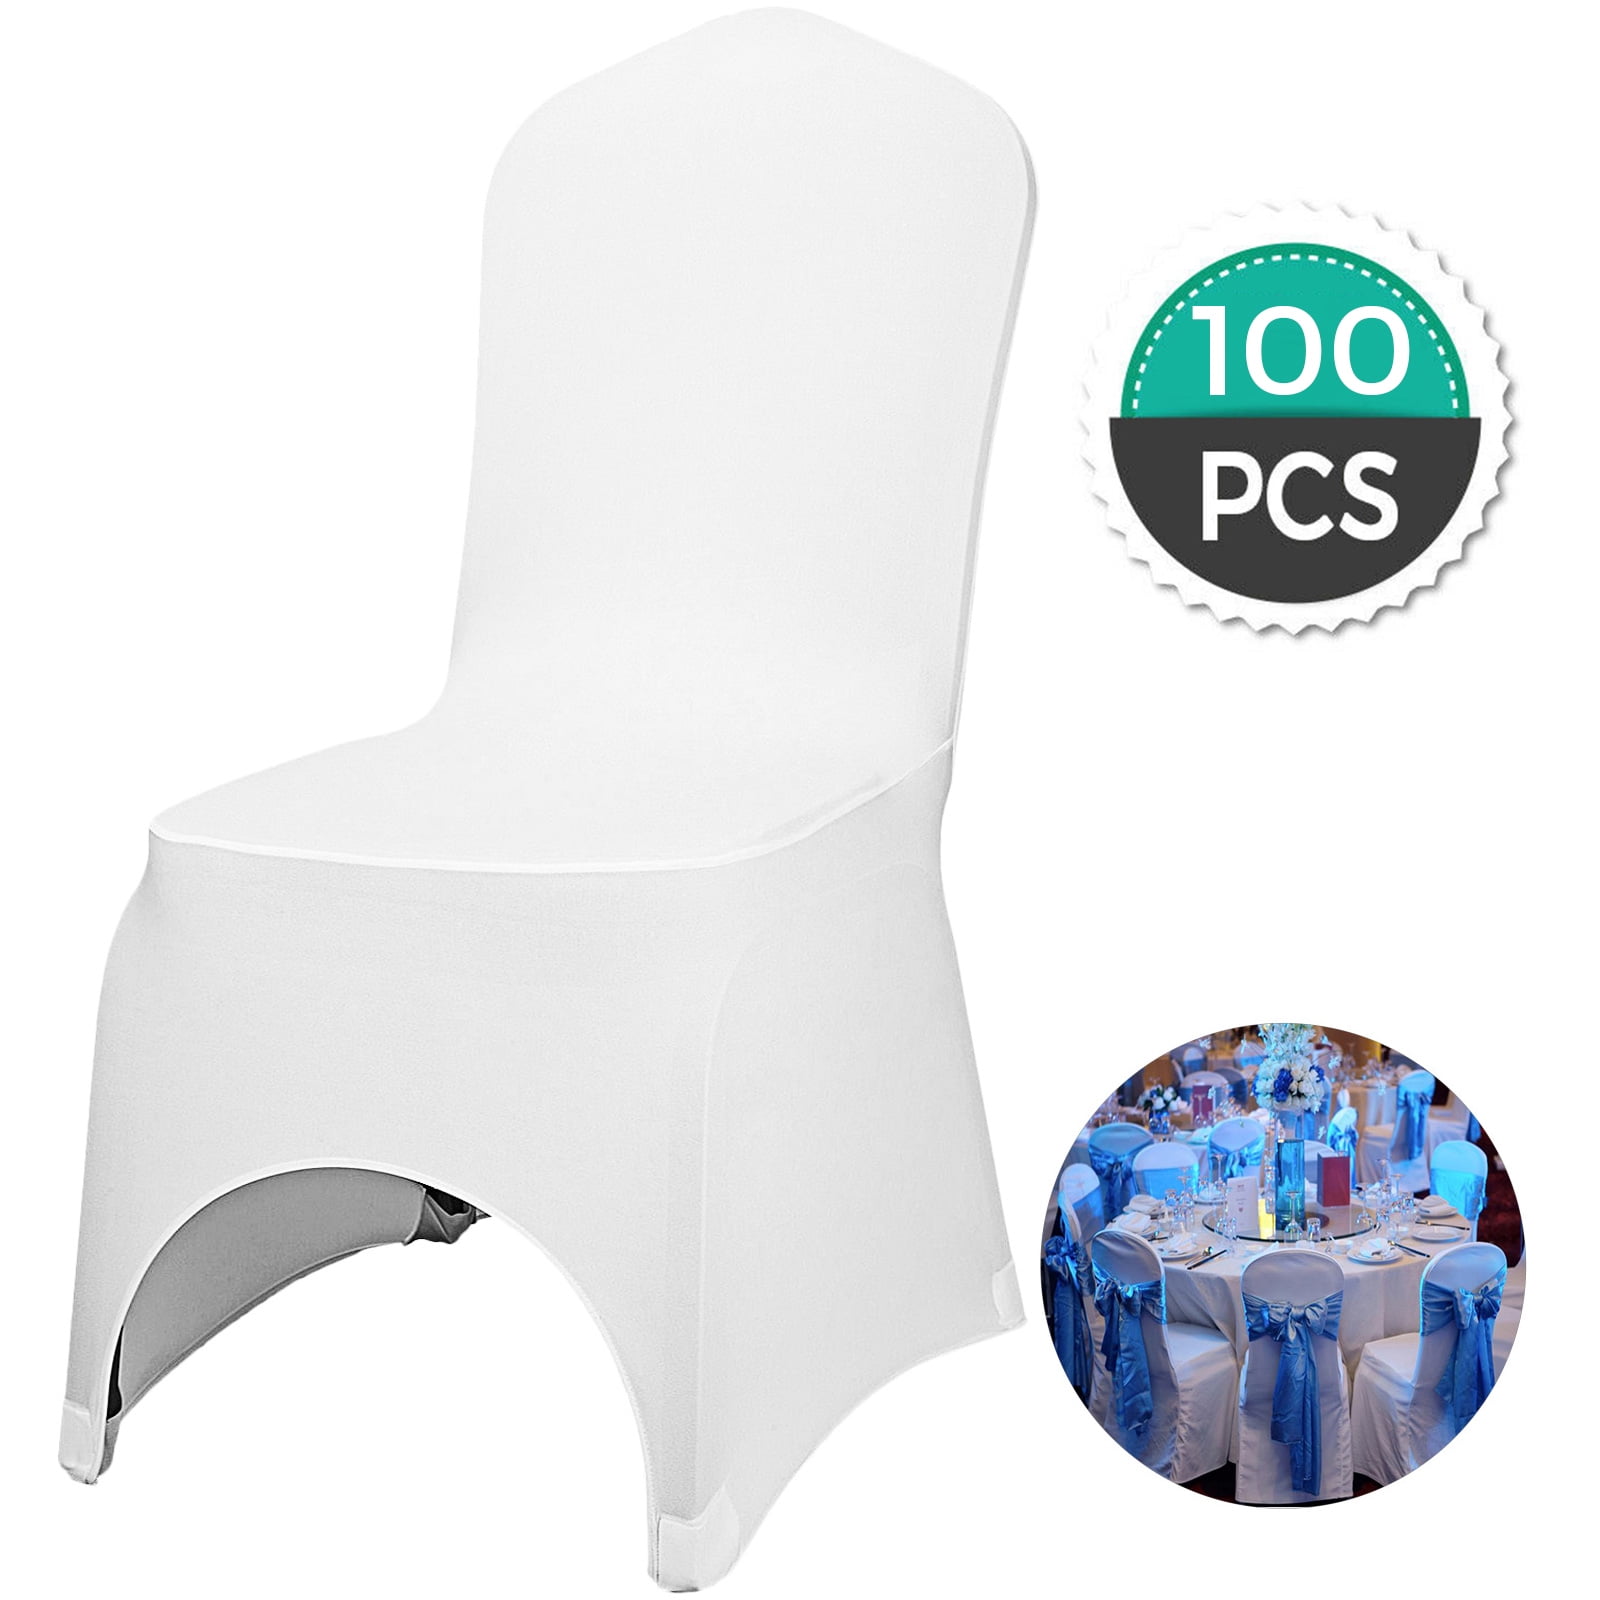 VEVORbrand 100 PCS White Chair Covers Spandex Chair Covers for Arched Front  Universial Stretch Chair Covers for Wedding Banquet Party Event 